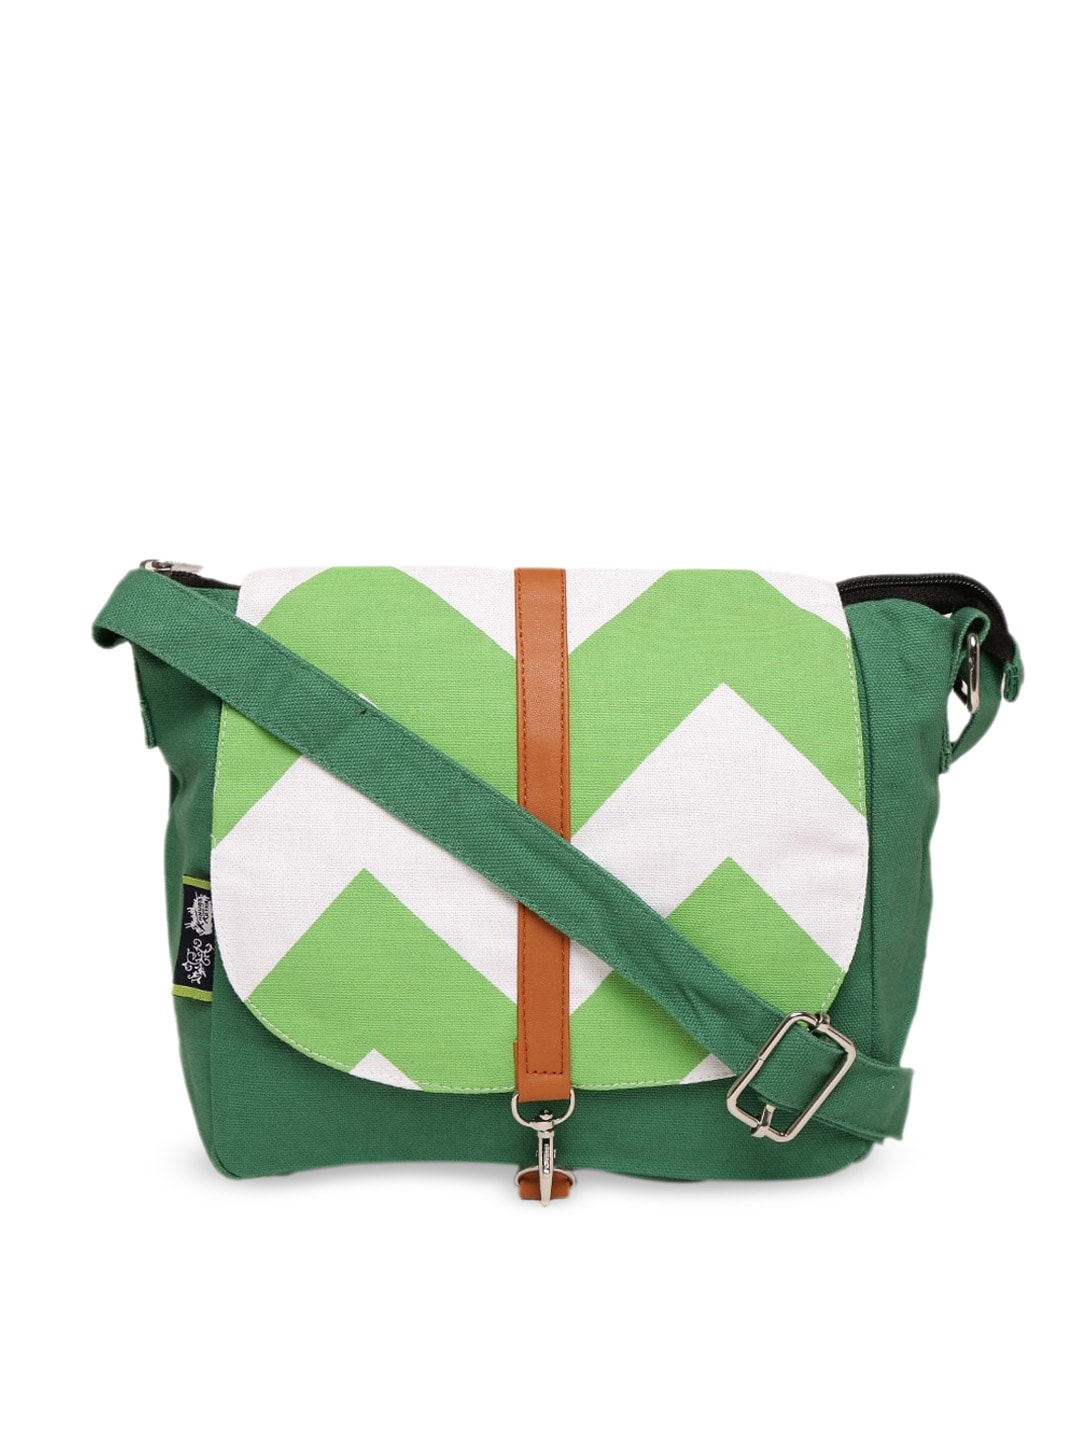 Kanvas Katha Green Colourblocked Structured Sling Bag with Fringed Price in India